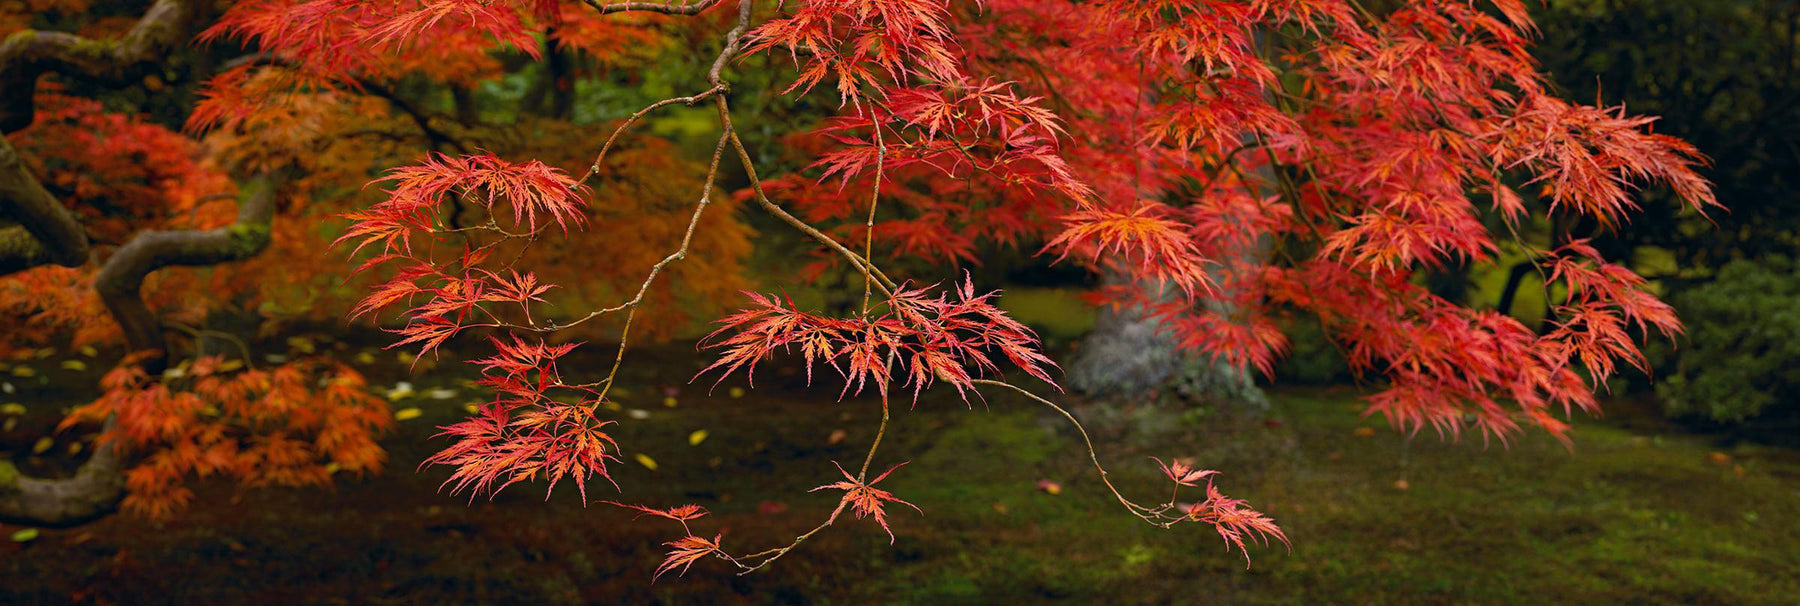 Red leaves and branches of a Japanese Maple tree reaching out with the trunk and ground in the background